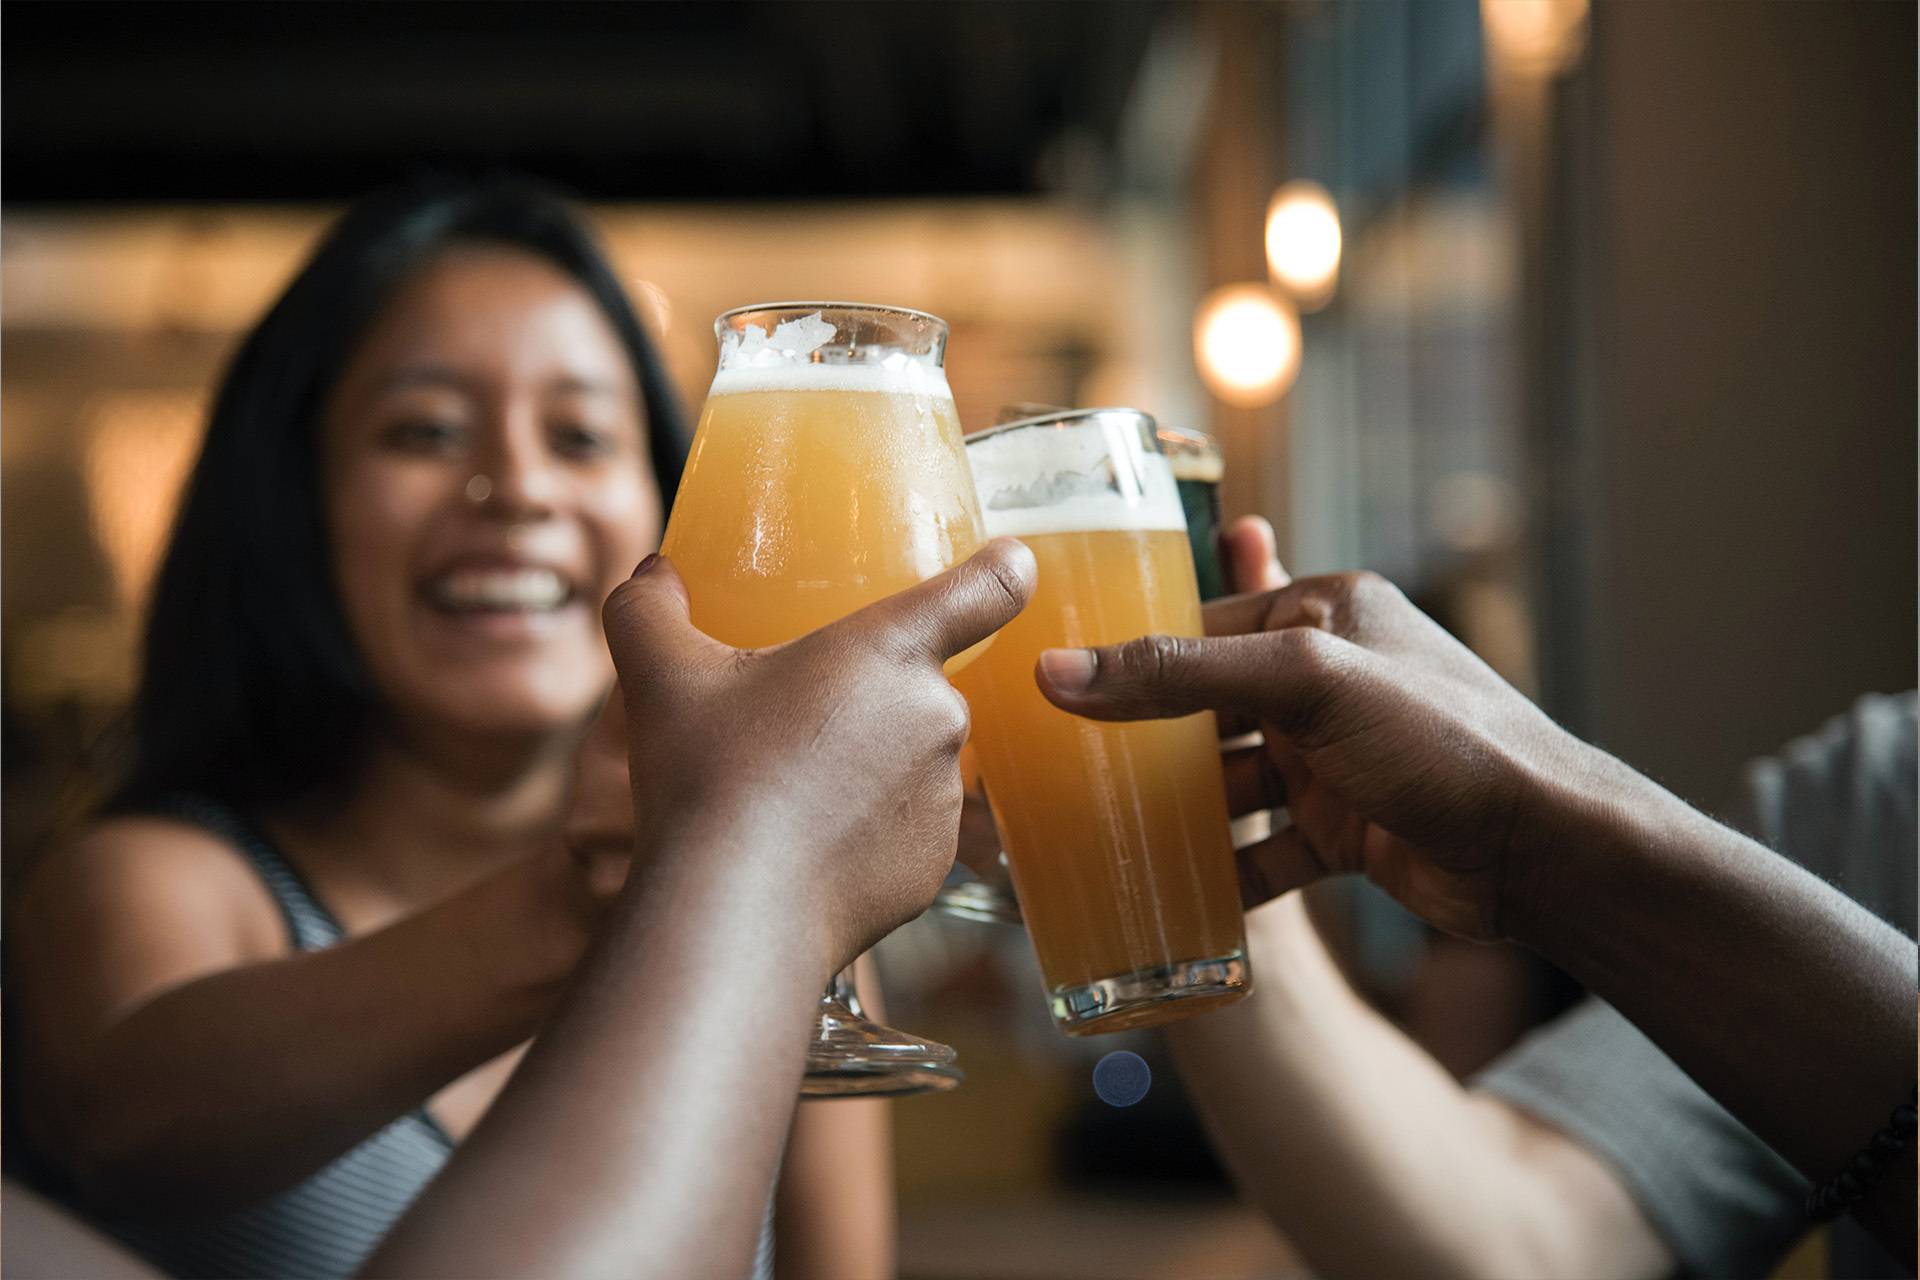 Bars and restaurants have been given the green light for further reopening in California, but it won't look quite like this in the Bay Area for a while. Elevate/Pexels